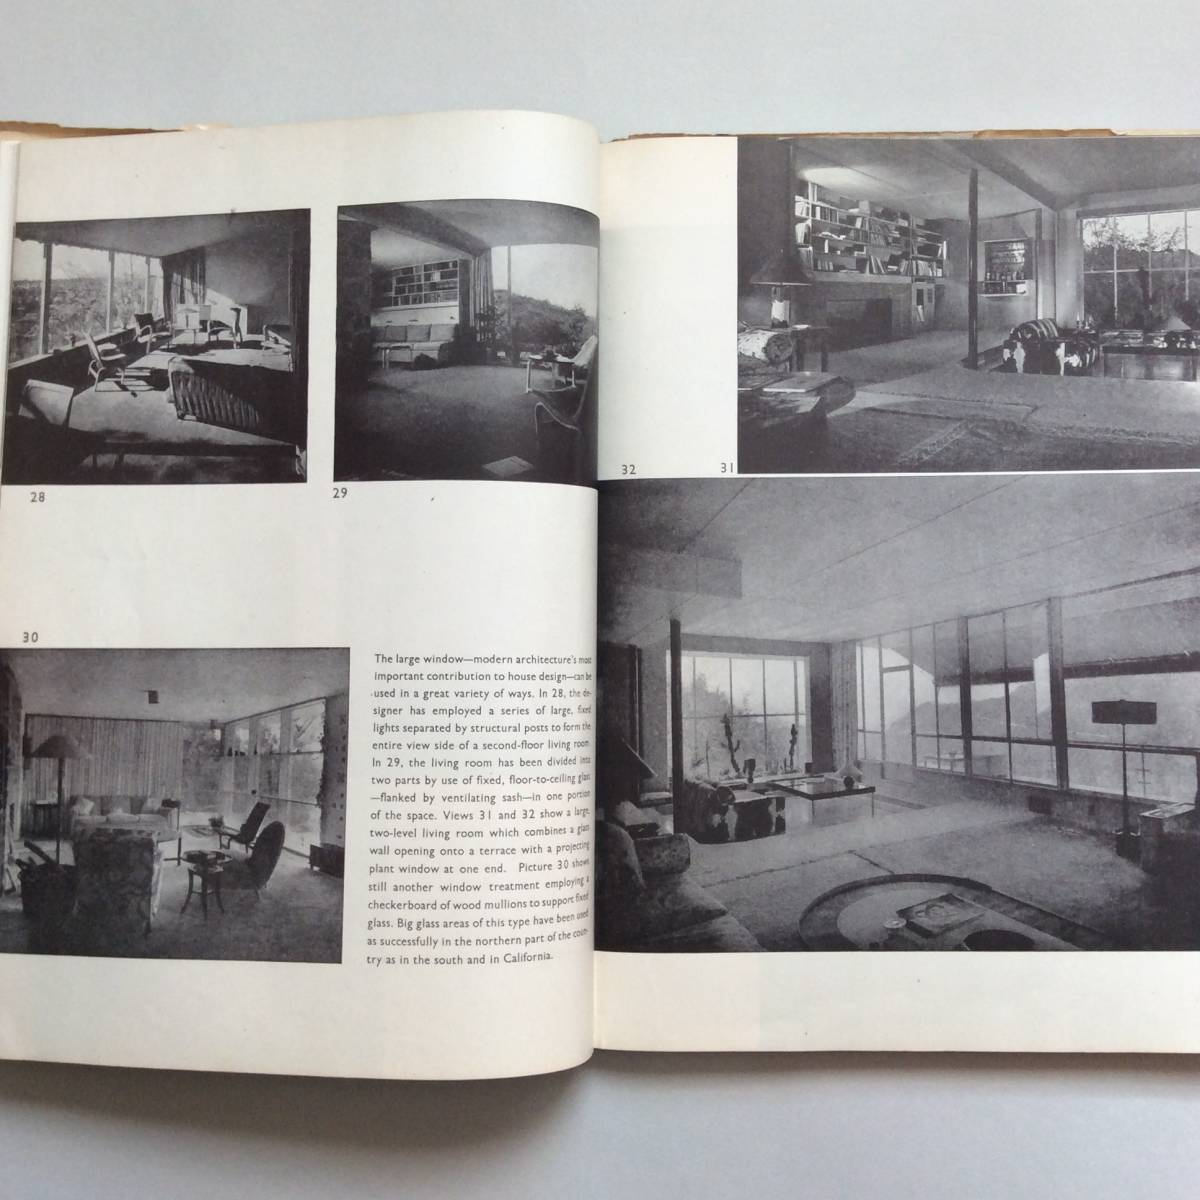 TOMORROW'S HOUSE : A complete guide for the home builder ／ George Nelson（ジョージ・ネルソン）／ Mid Century（ミッドセンチュリー